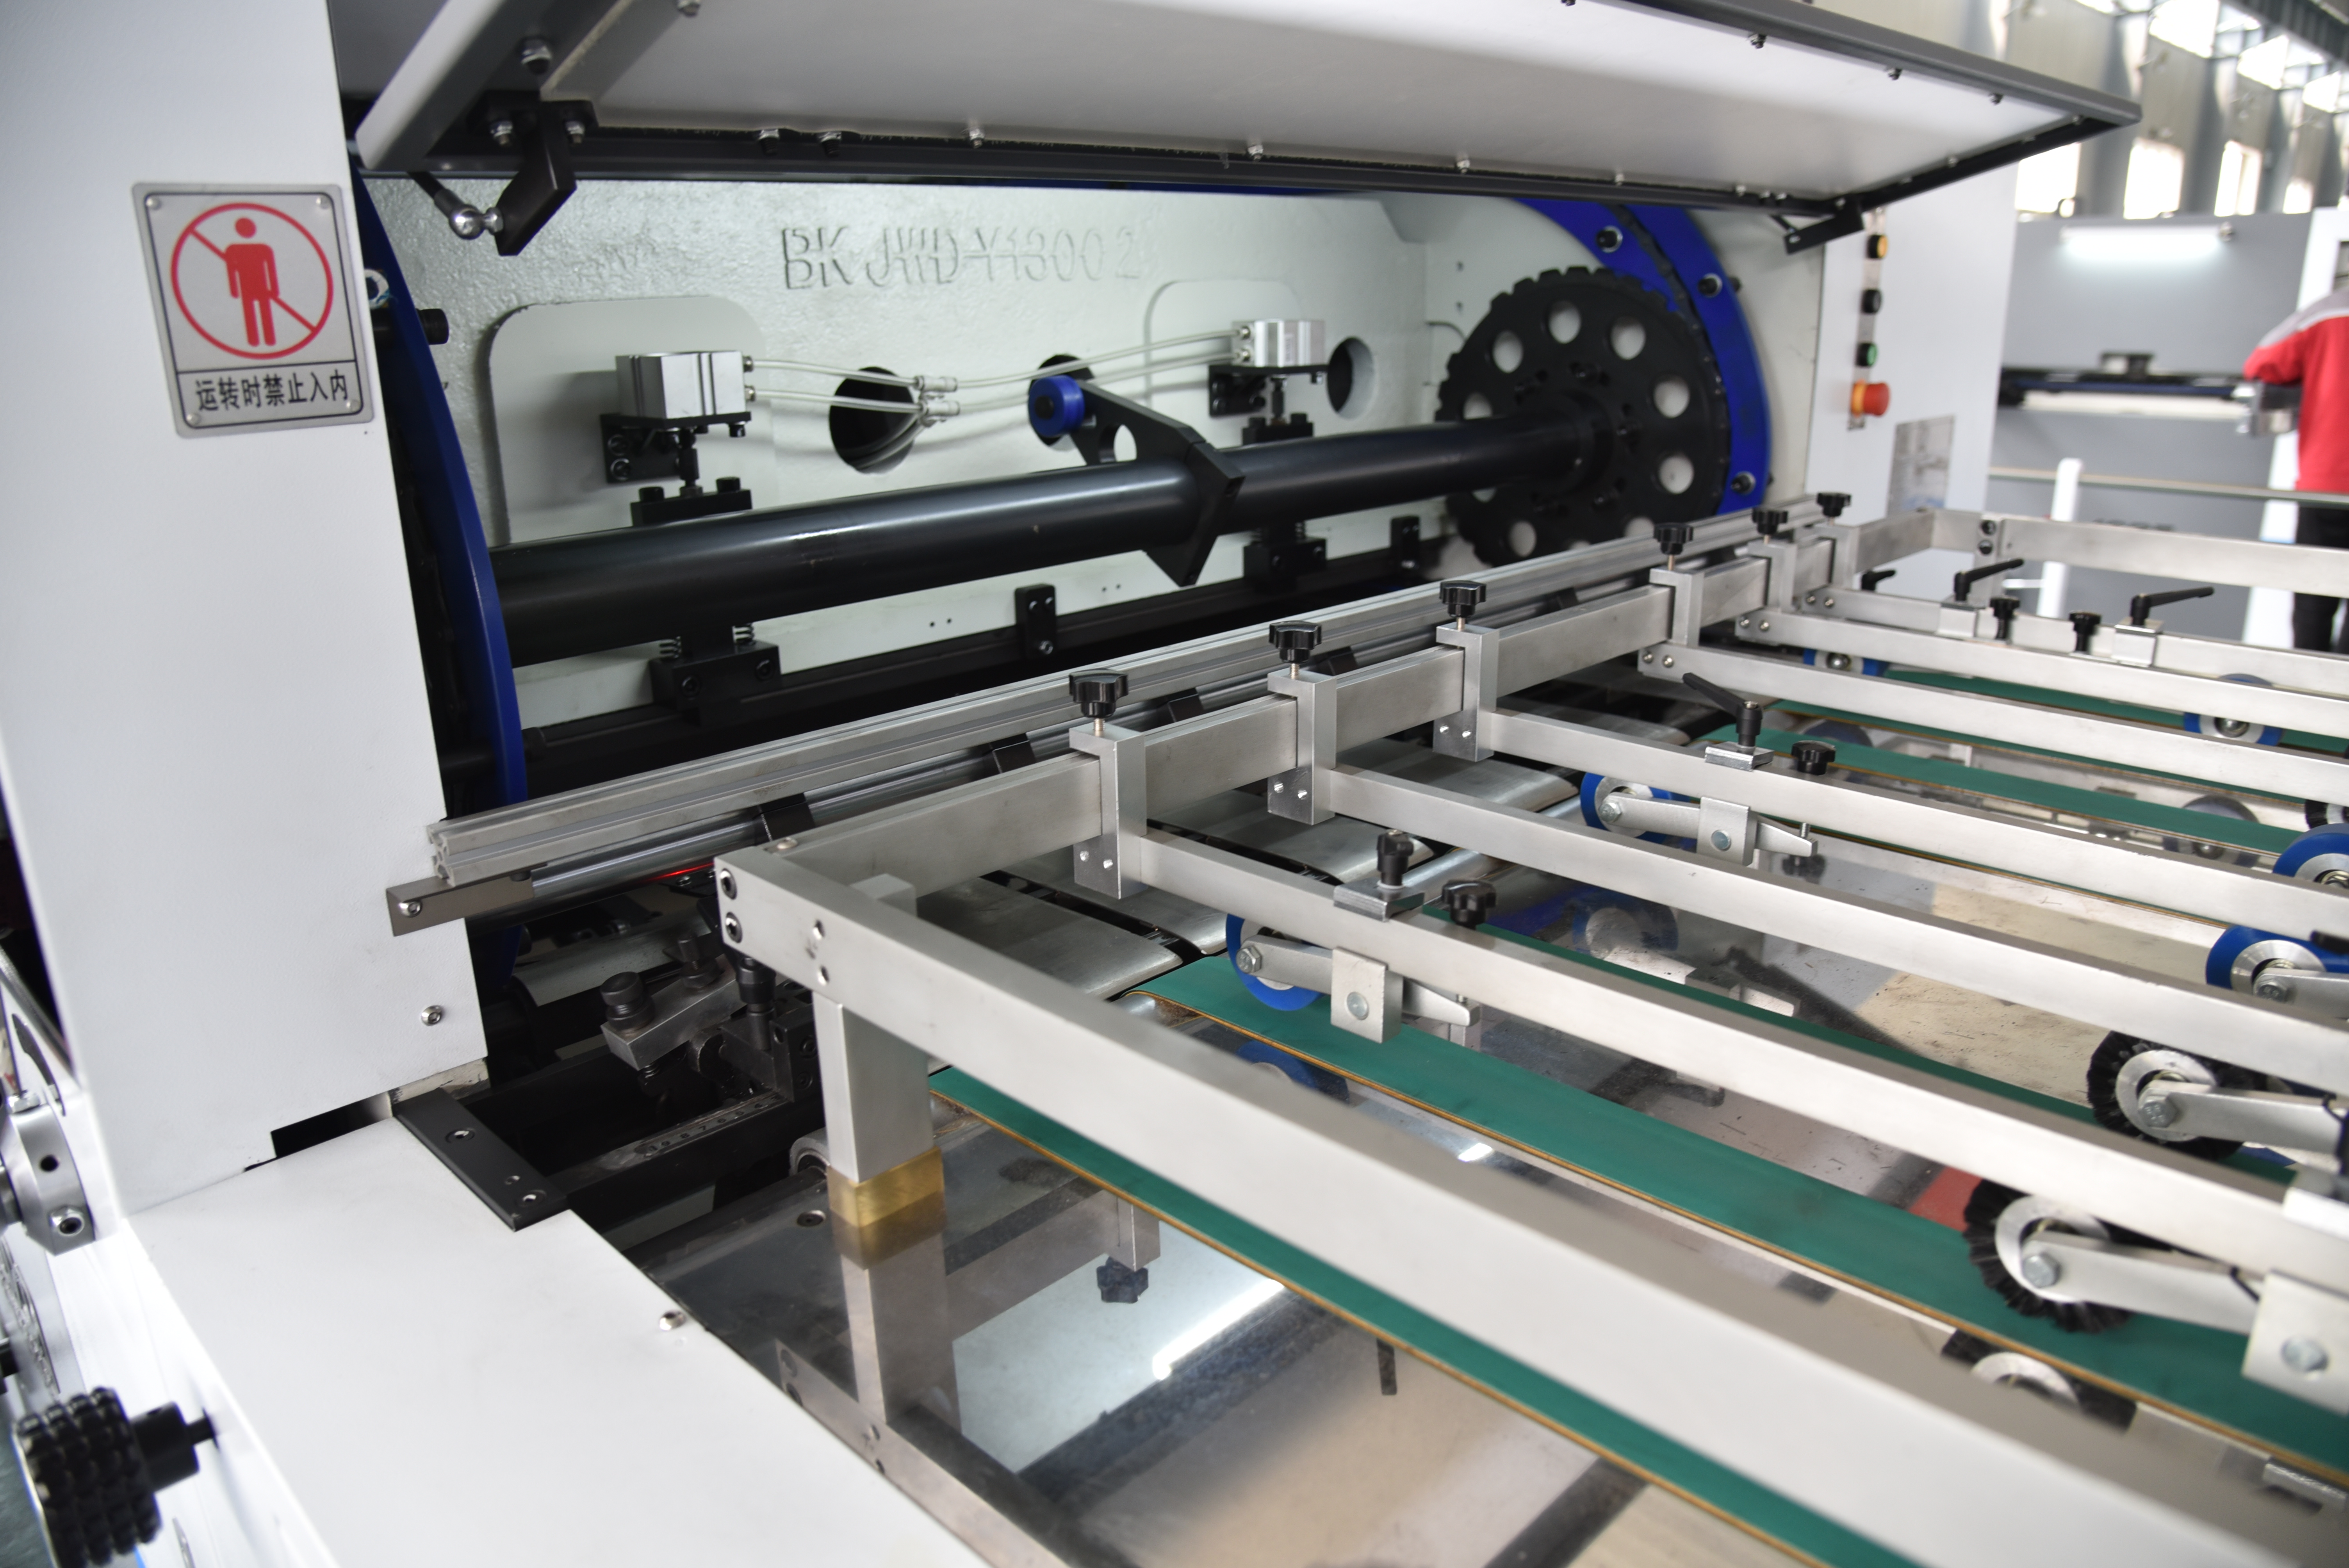 Automatic die cutting and creasing machine MY1300